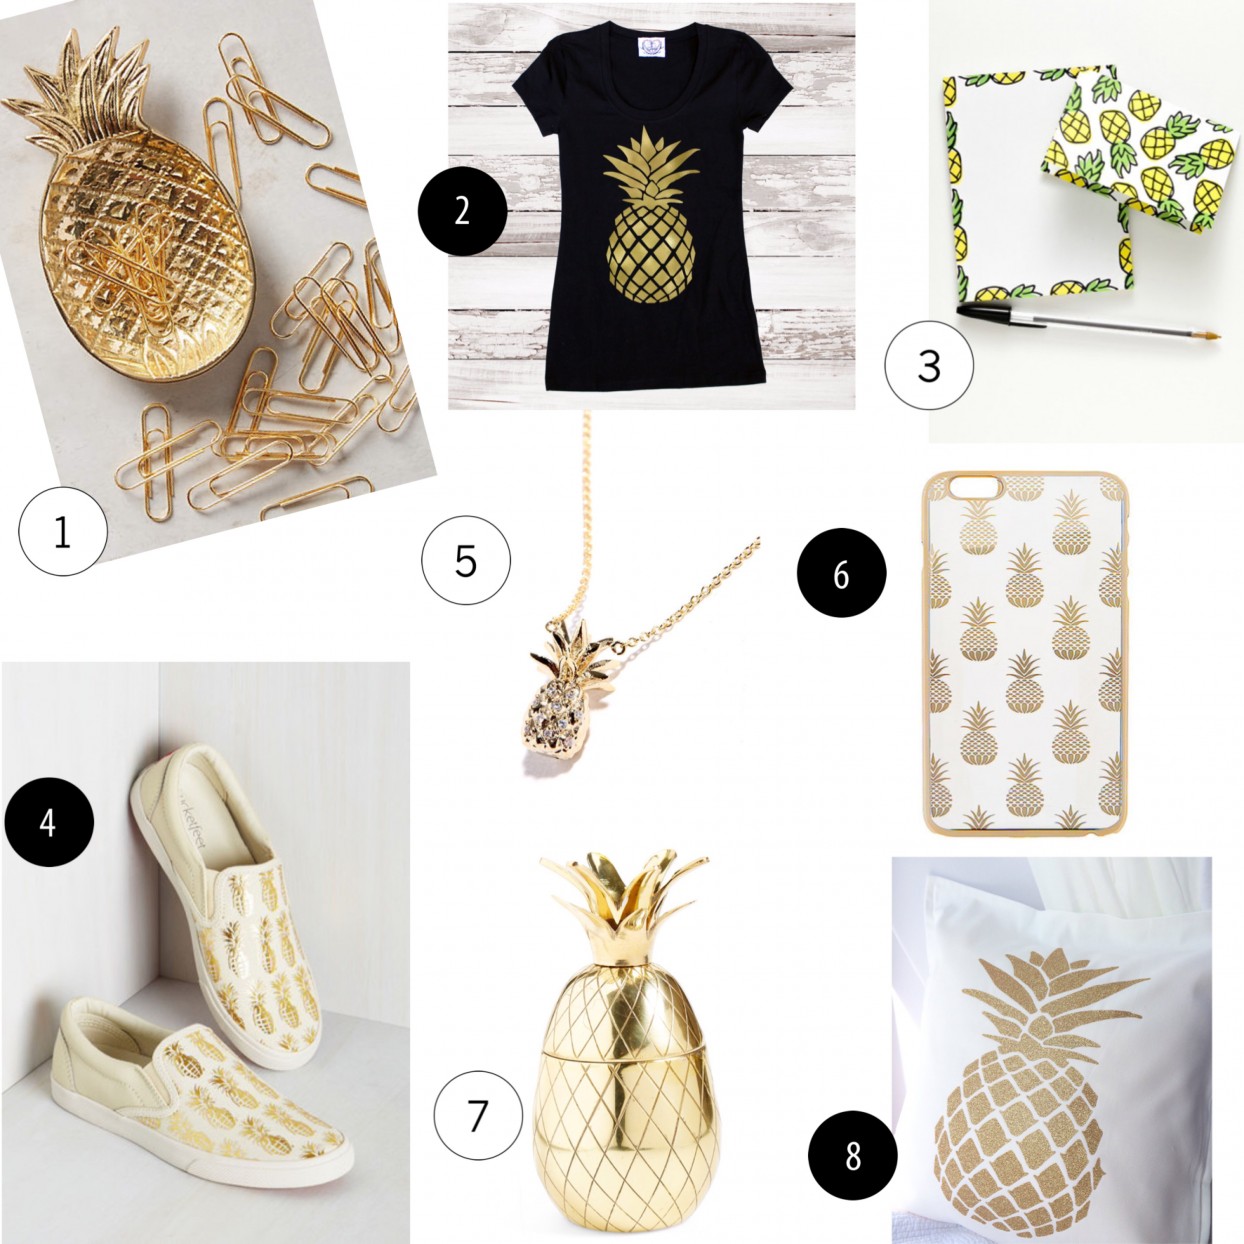 A Roundup of All Things Pinapple